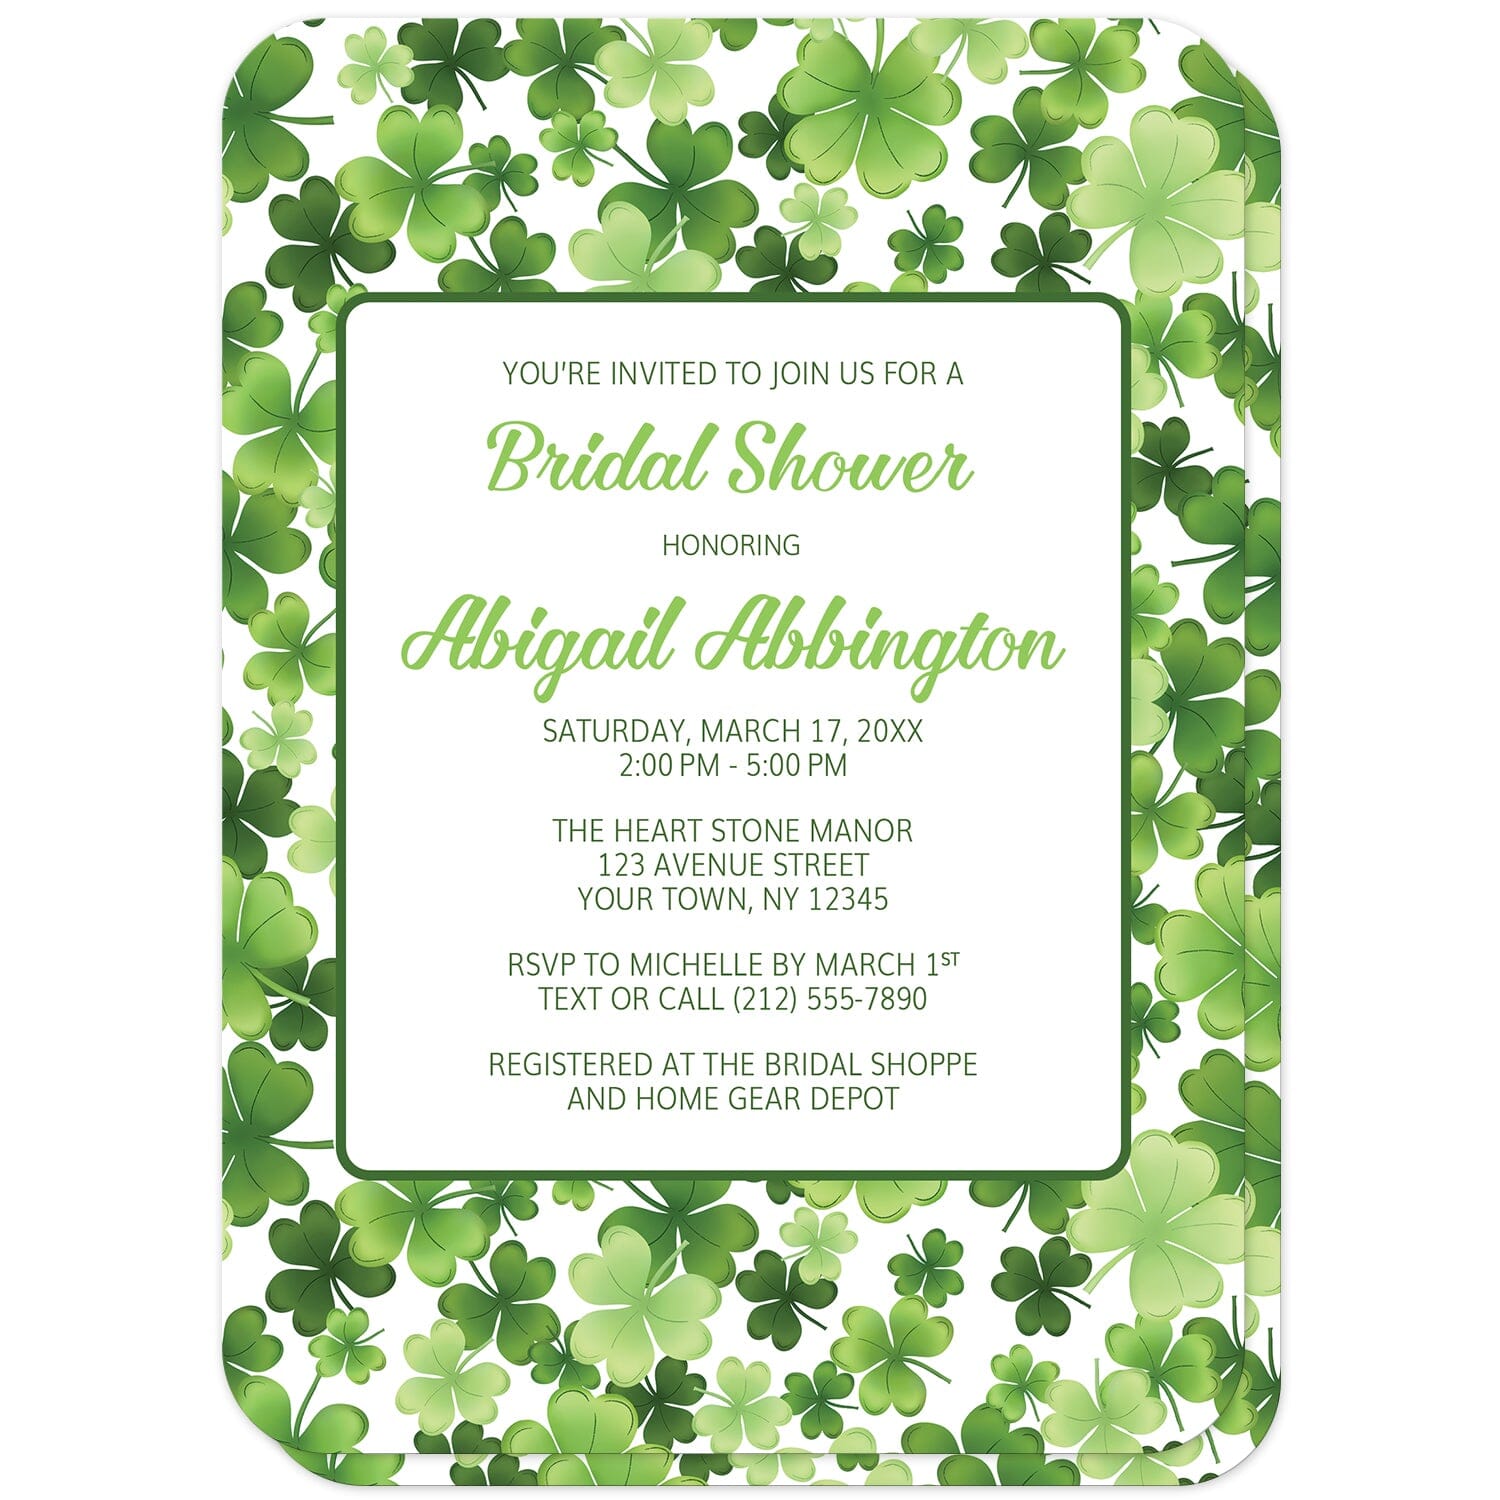 Shamrocks and 4-Leaf Clovers Bridal Shower Invitations (front with rounded corners) at Artistically Invited. Shamrocks and 4-leaf clovers bridal shower invitations designed with a gorgeous luck-inspired green pattern background with shamrocks and 4-leaf clovers in varying sizes and shades of green. Your personalized bridal shower celebration details are custom printed in green on white over the shamrocks and clovers pattern. This vibrant green pattern is also printed on the back side of the invites. 